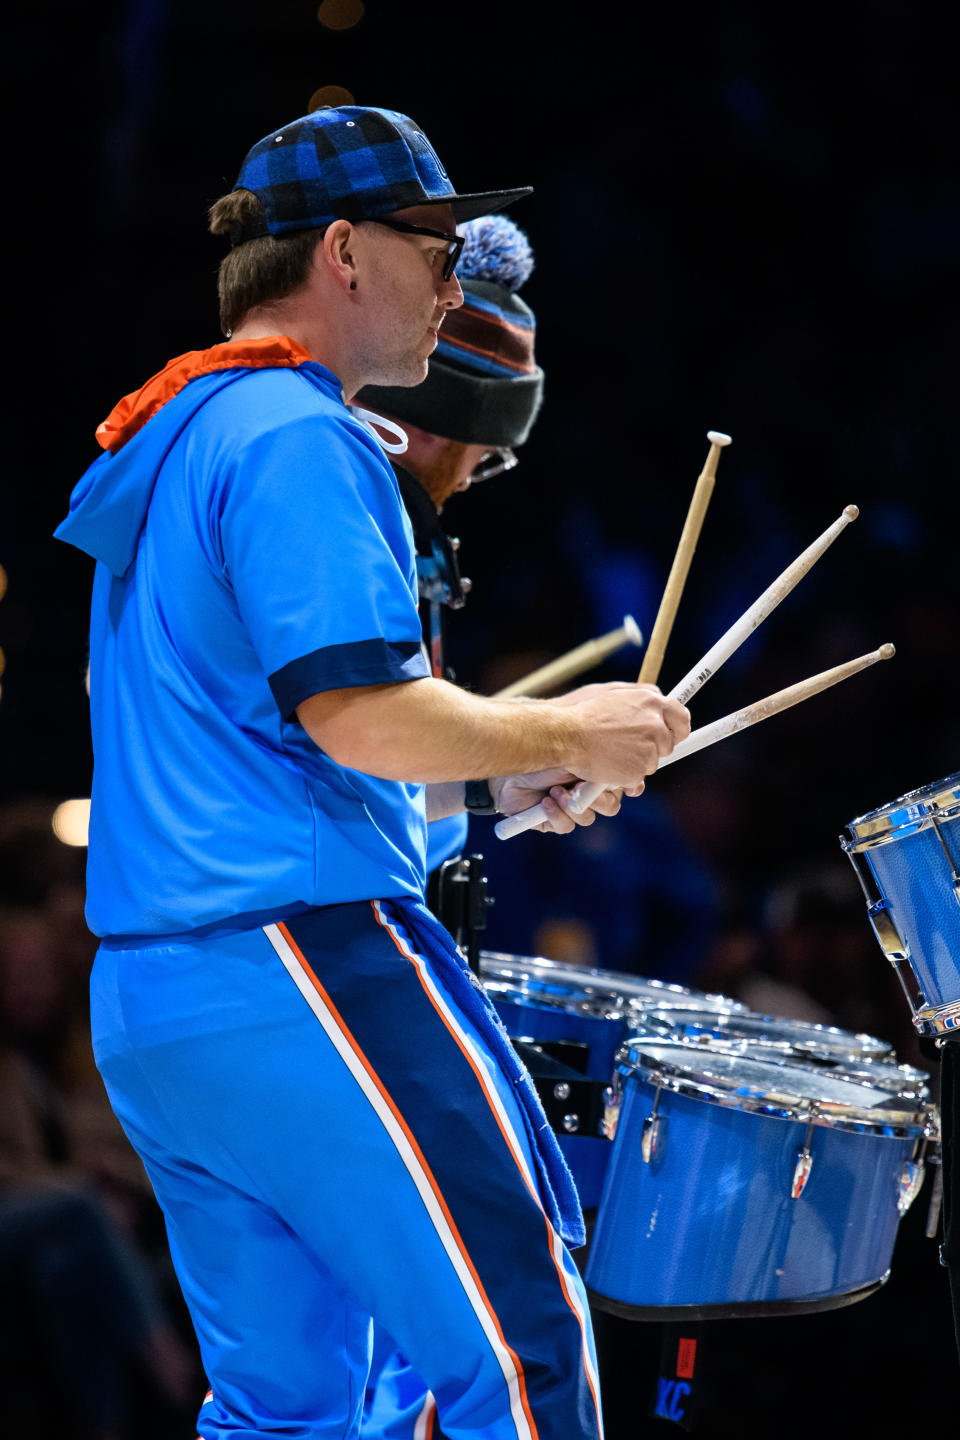 Oct 17, 2023; Oklahoma City, Oklahoma, USA; Oklahoma City Thunder dummers perform during a time out in the game against the Milwaukee Bucks Paycom Center. Mandatory Credit: Rob Ferguson-USA TODAY Sports